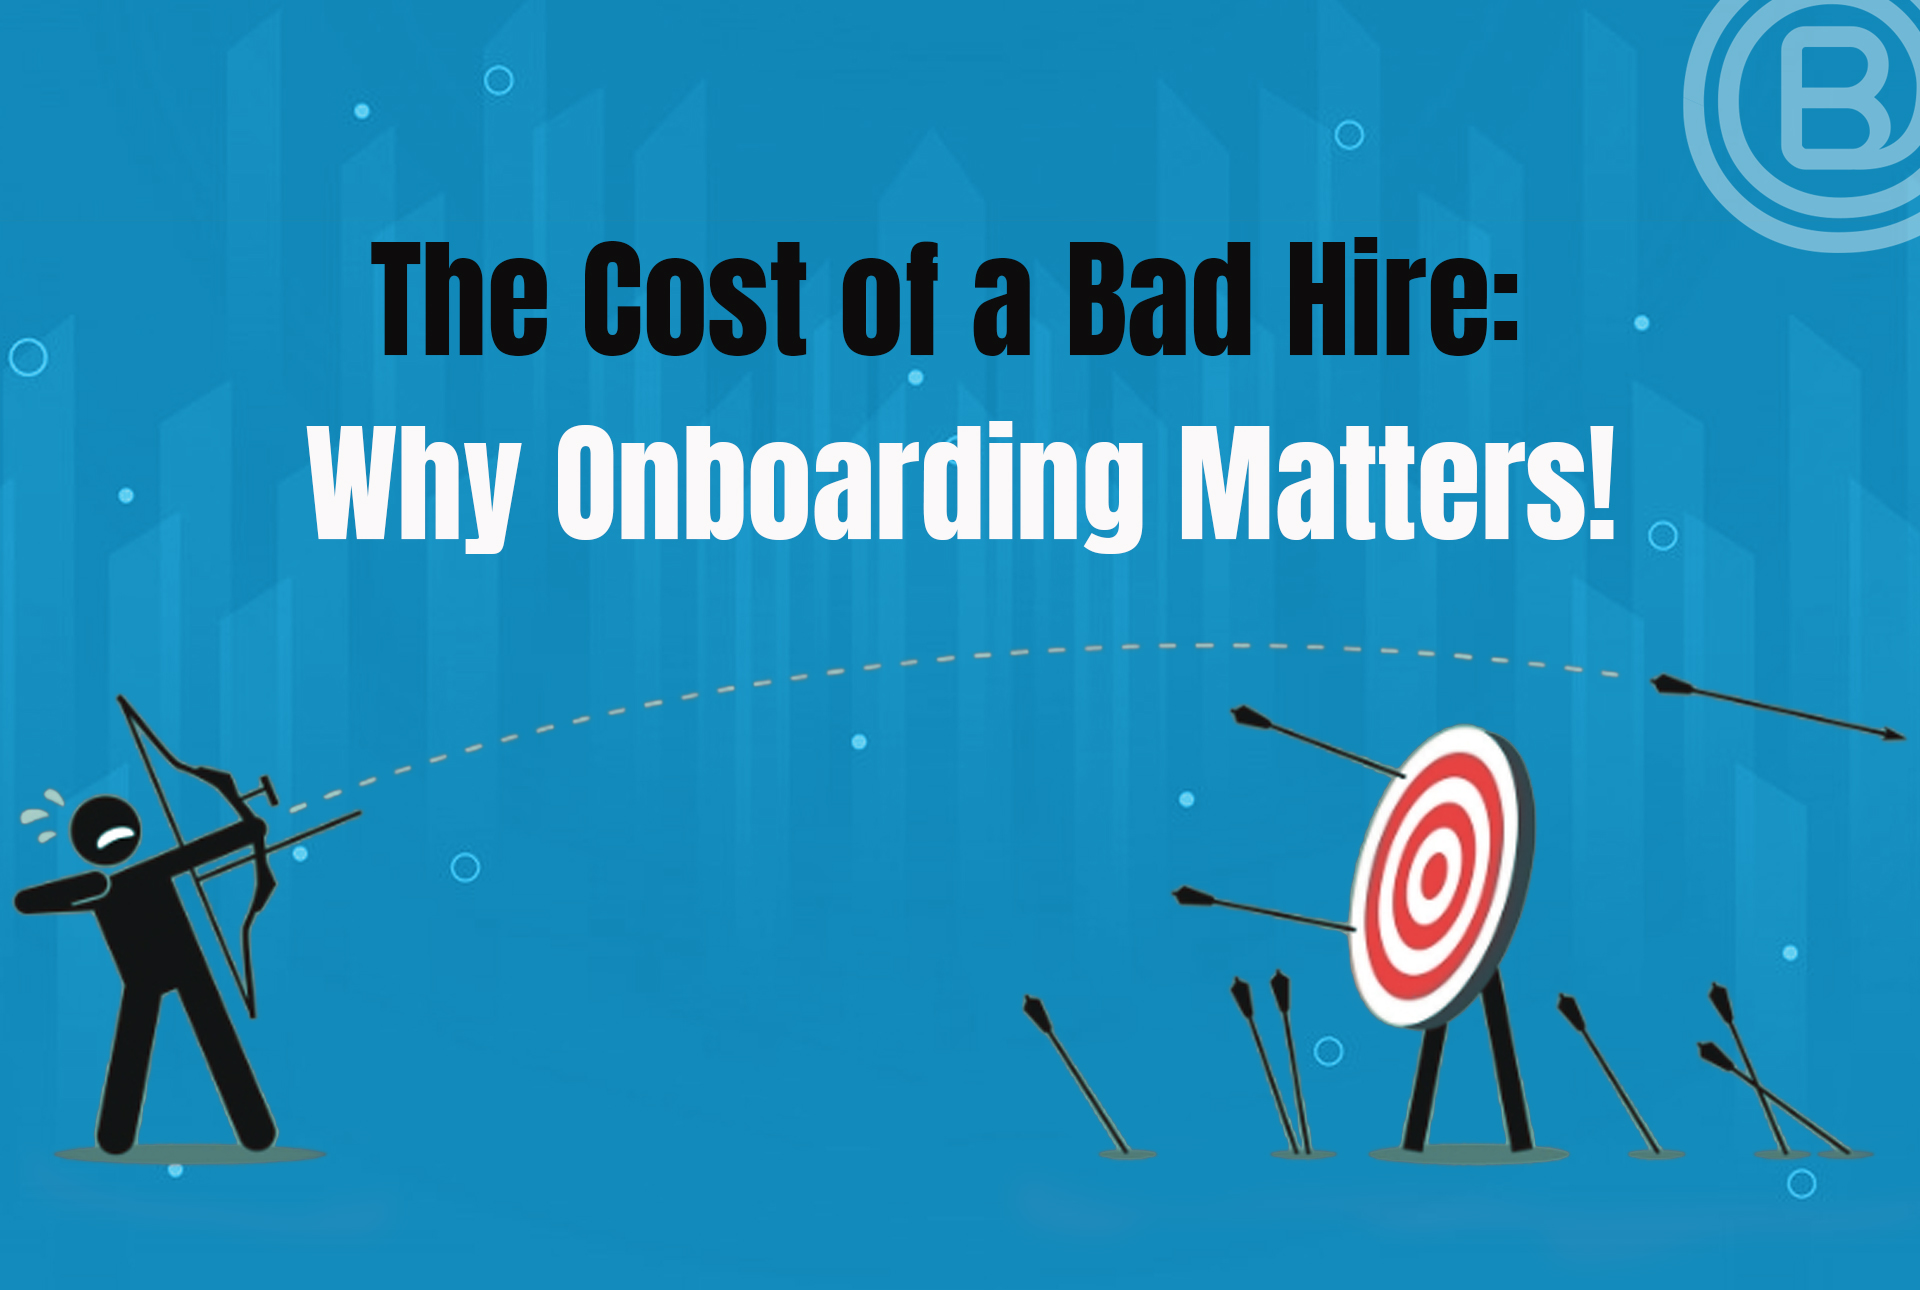 The Cost of a Bad Hire: Why Onboarding Matters!